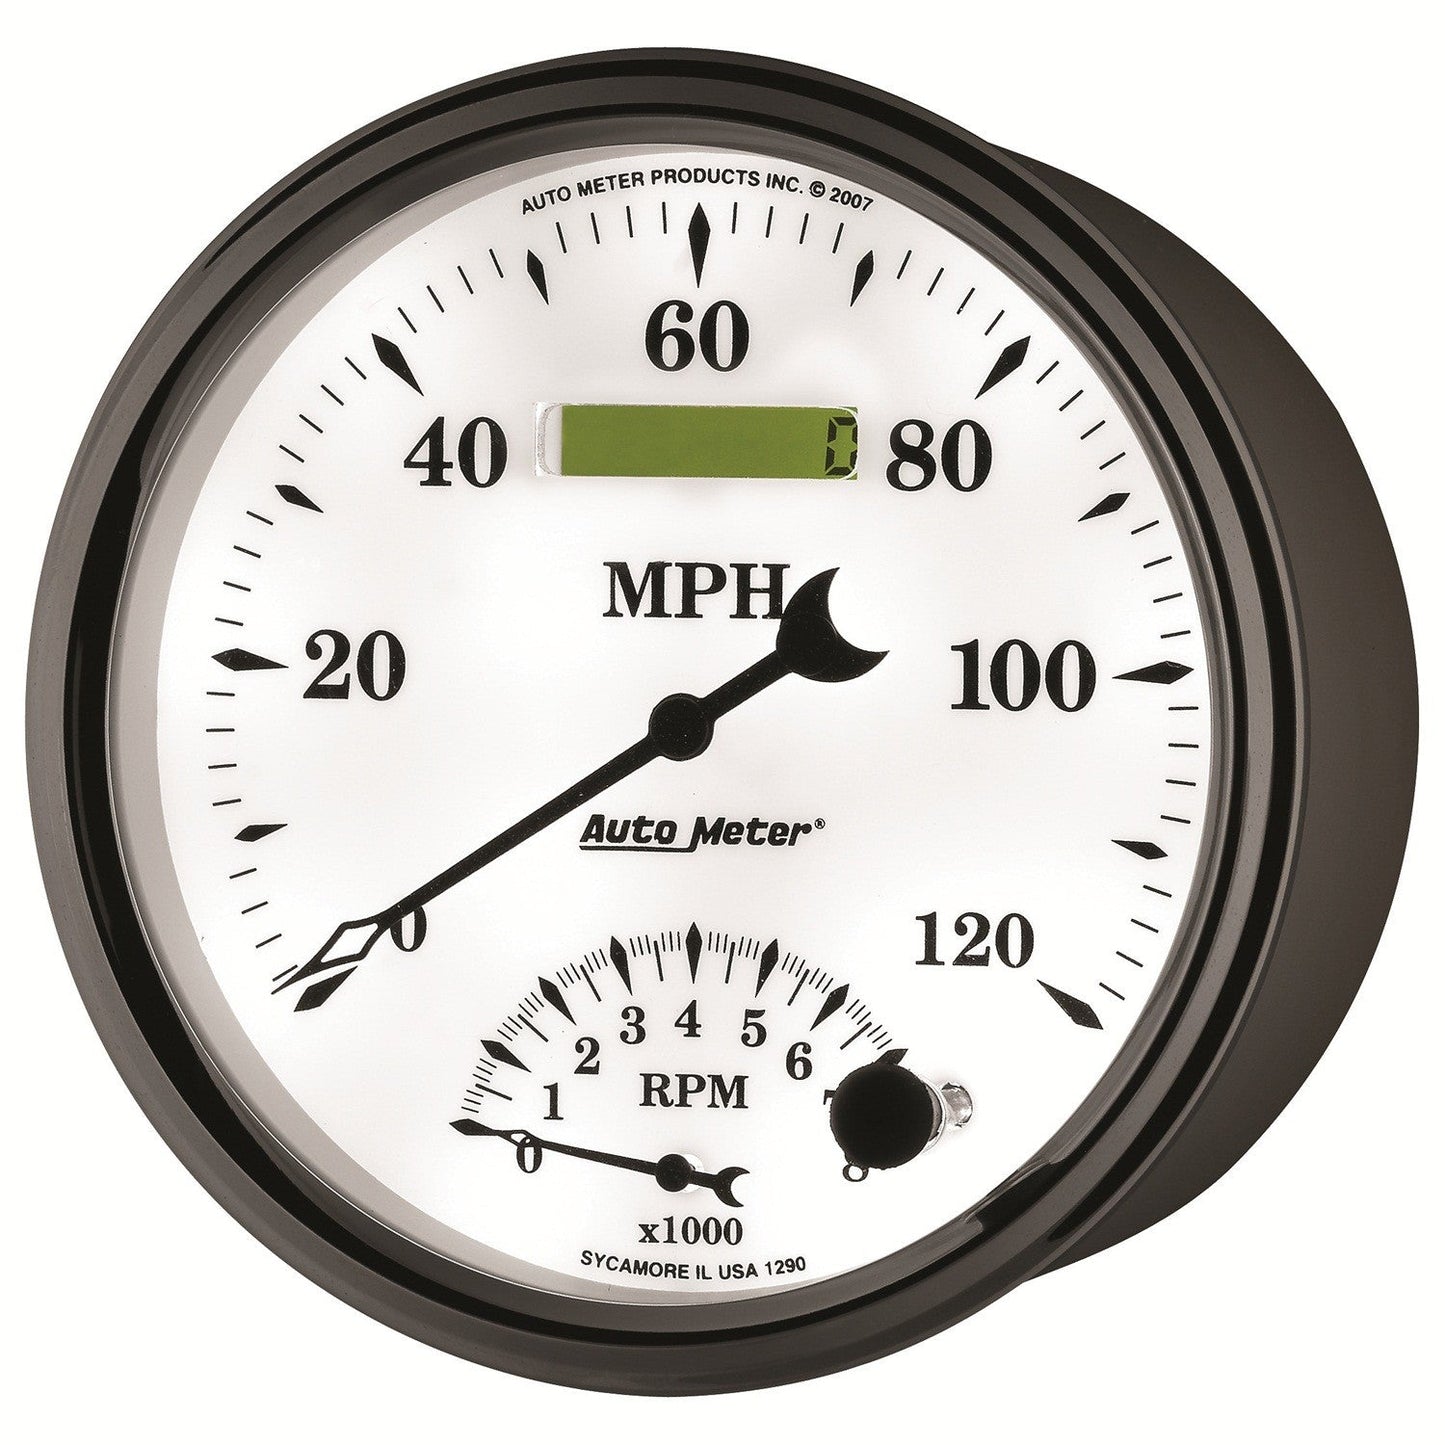 AutoMeter - 5" TACHOMETER/SPEEDOMETER COMBO, 8K RPM/120 MPH, ELECTRIC, OLD-TYME WHITE II (1290)